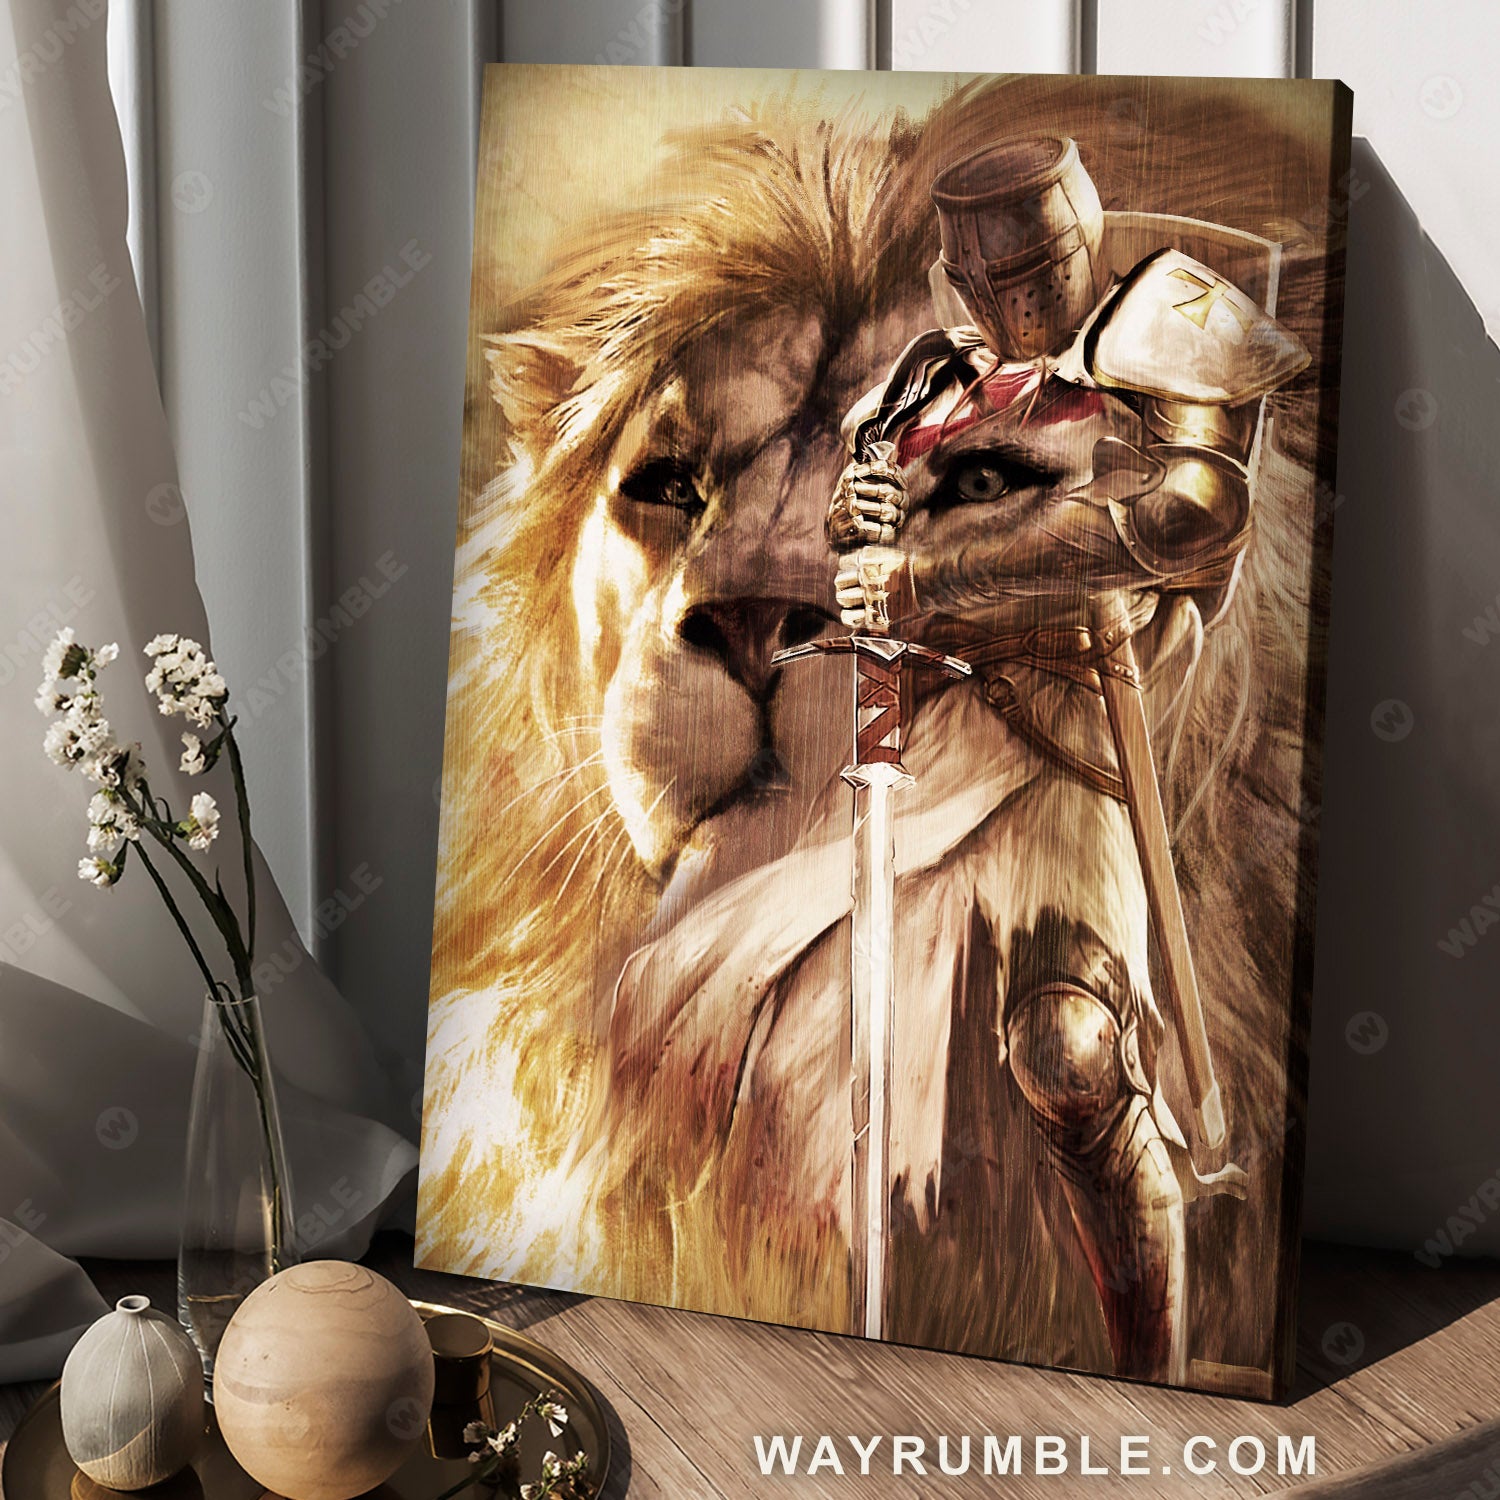 Knight of God, The lion of Judah, Warrior painting, Under the command of God - Jesus Portrait Canvas Prints, Christian Wall Art